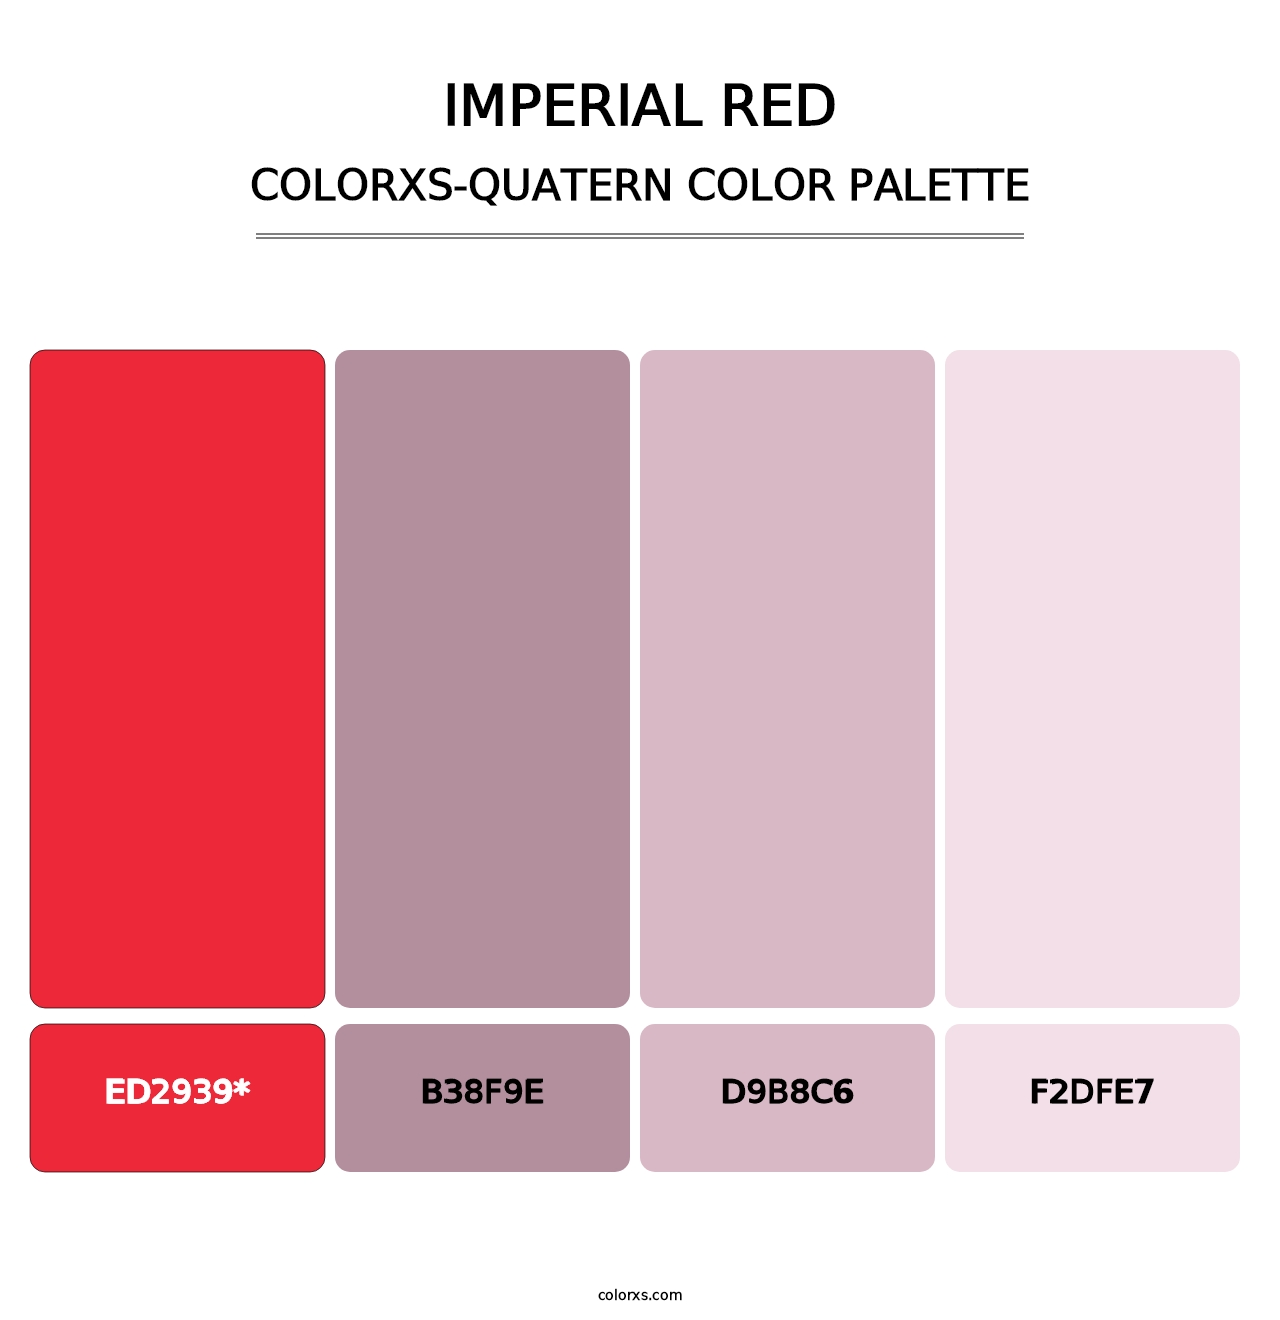 Imperial Red - Colorxs Quatern Palette